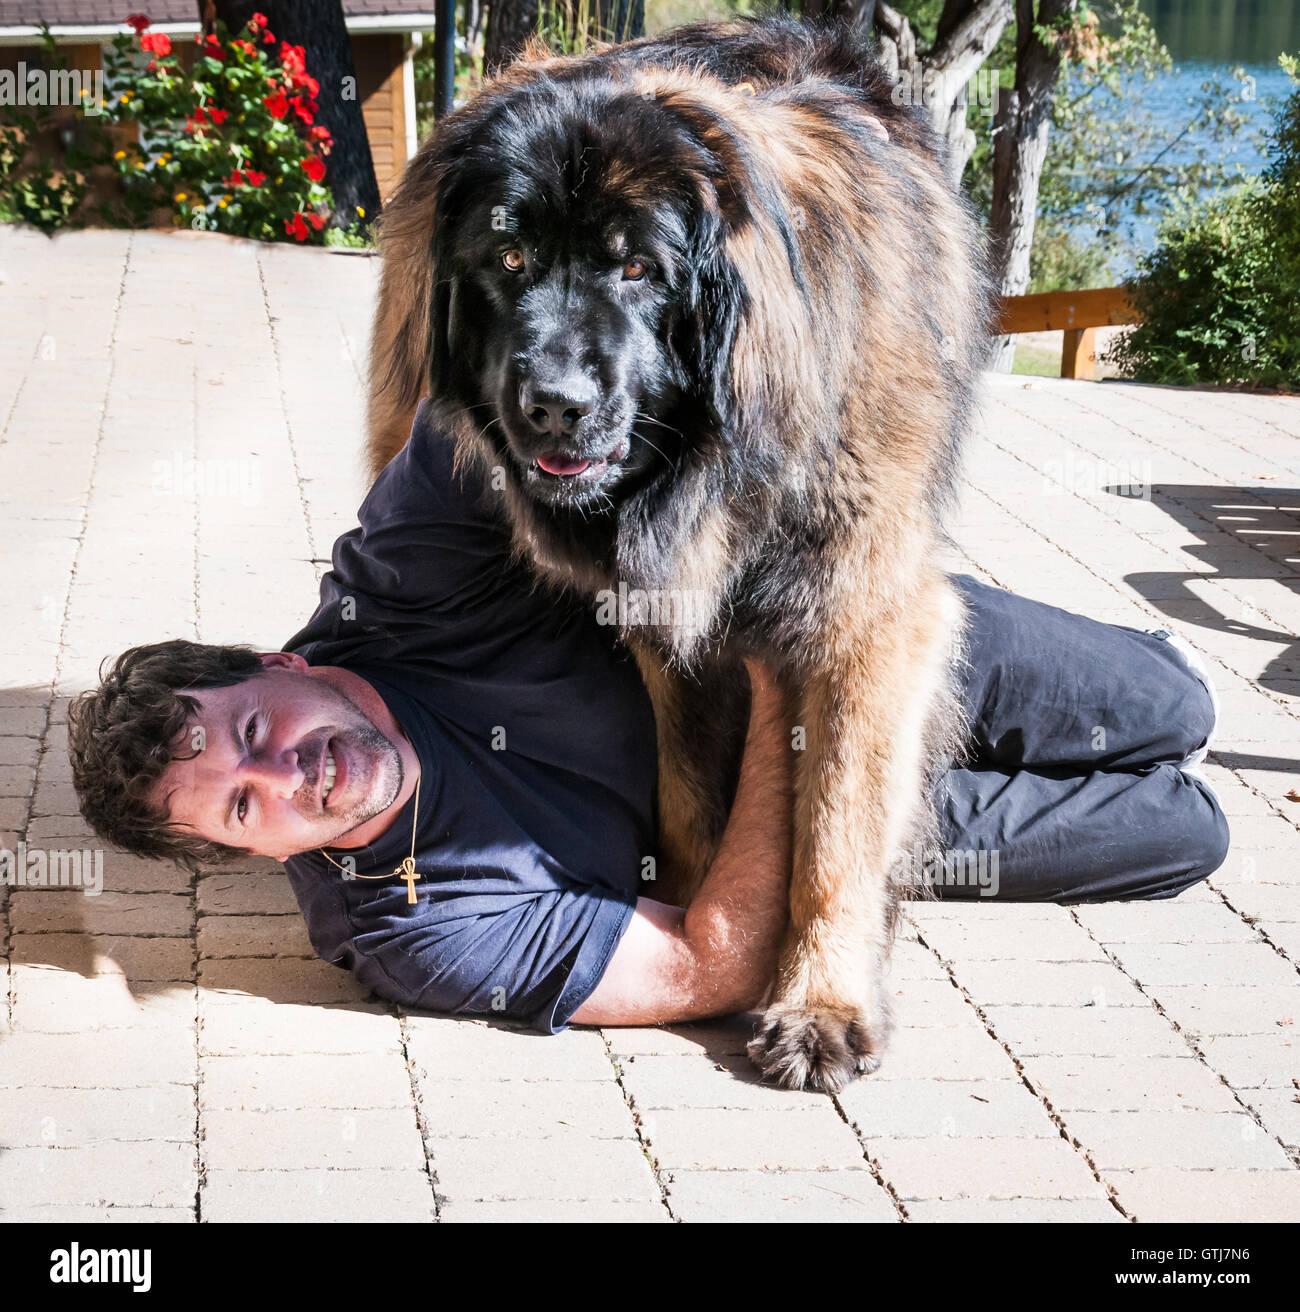 Leonberger dog and the master playing in a patio Stock Photo - Alamy